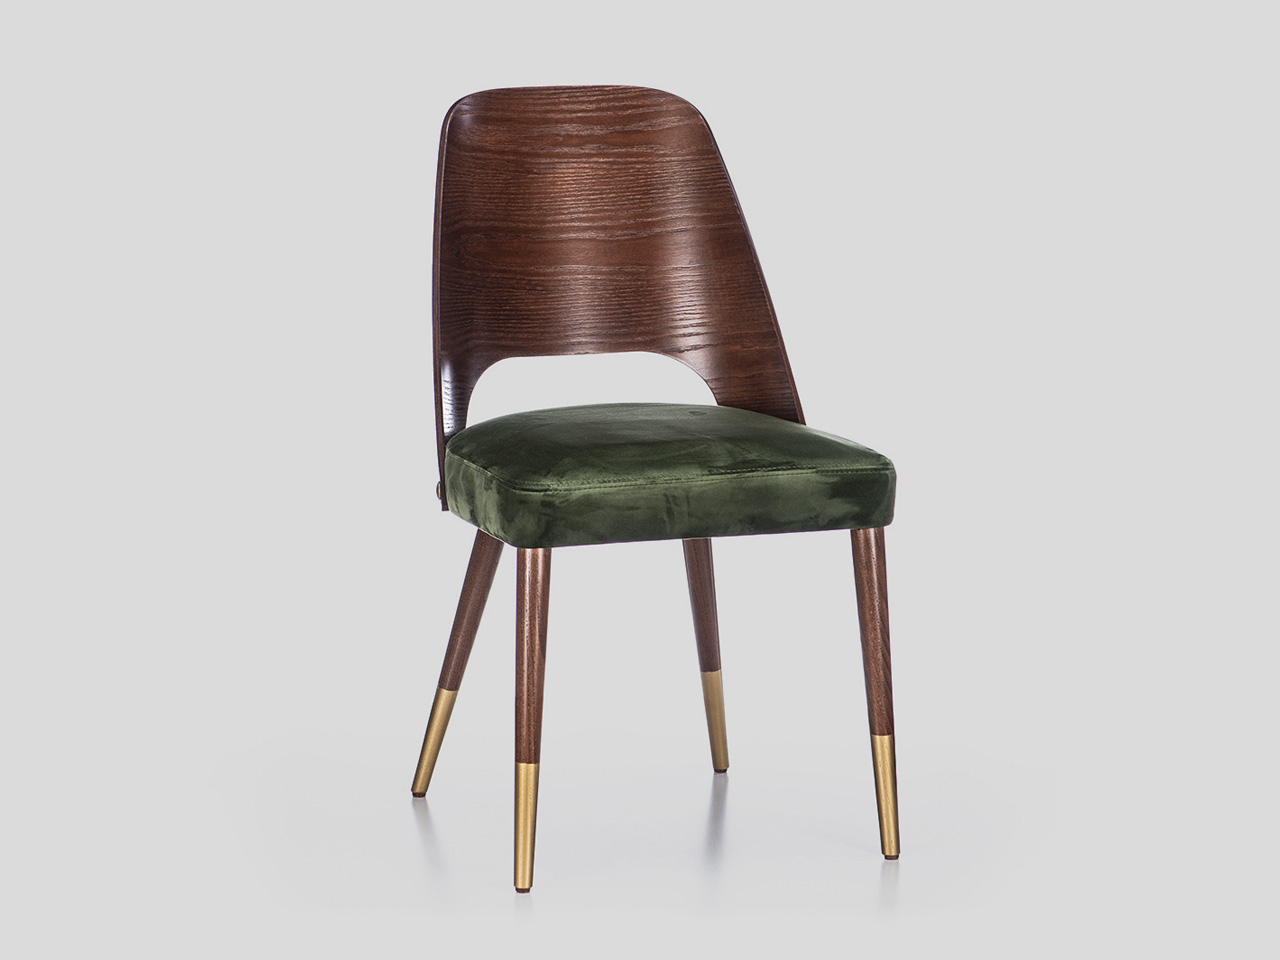 Modern upholstered armchair with wooden BACK AND legs Serbia manufacture production Linea Milanovic